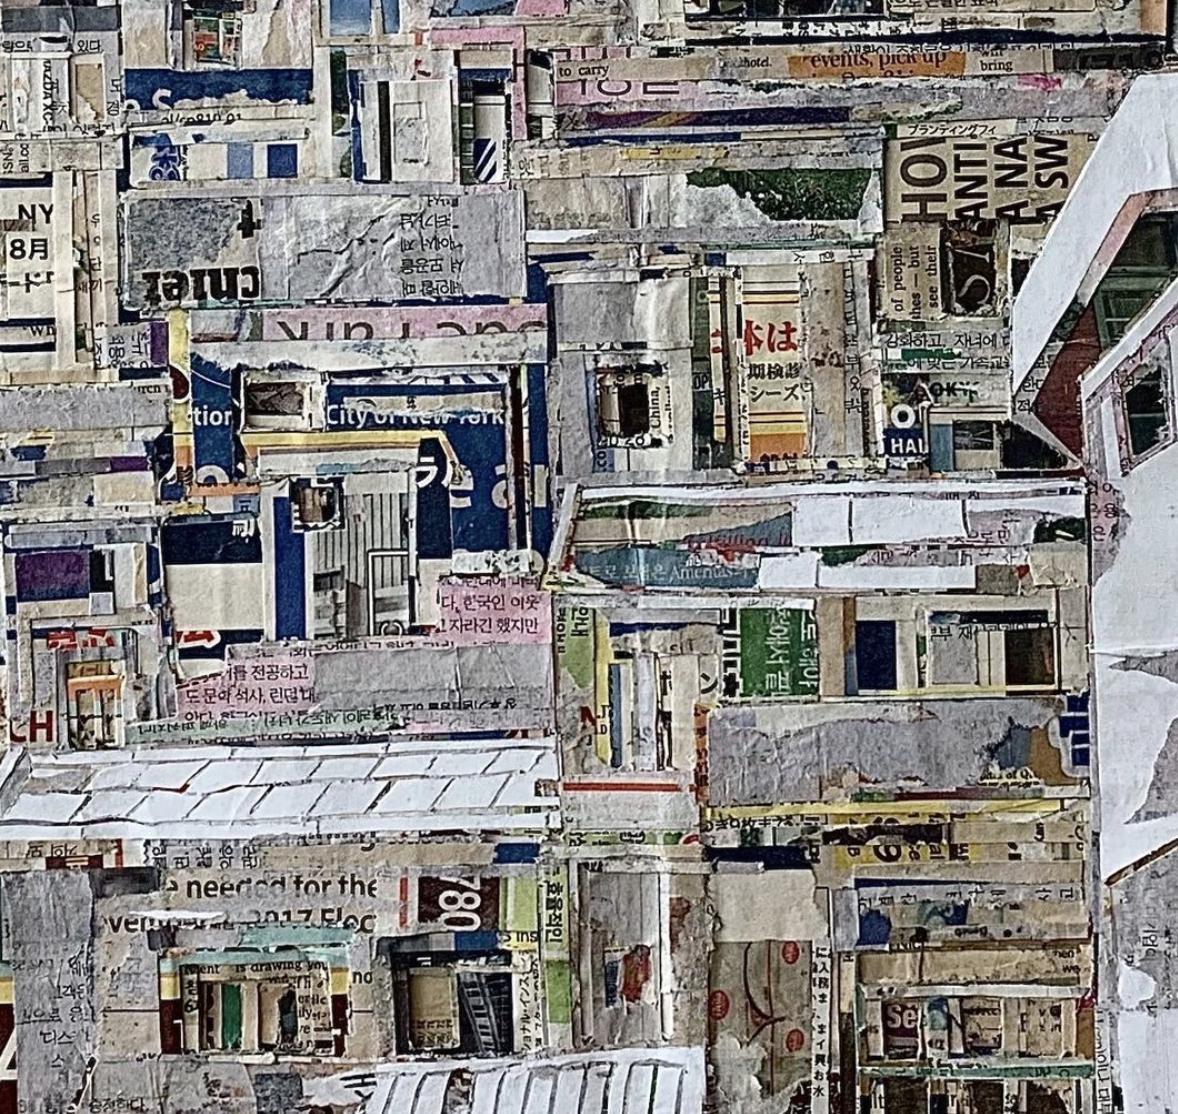 Newpaper on canvas 3D-collage set in An Acrylic Box

In the hands of Yeji Moon, ordinary materials are transformed into beautiful and complex collages that powerfully recall childhood nostalgia and the rapidly changing world. Inspired by her